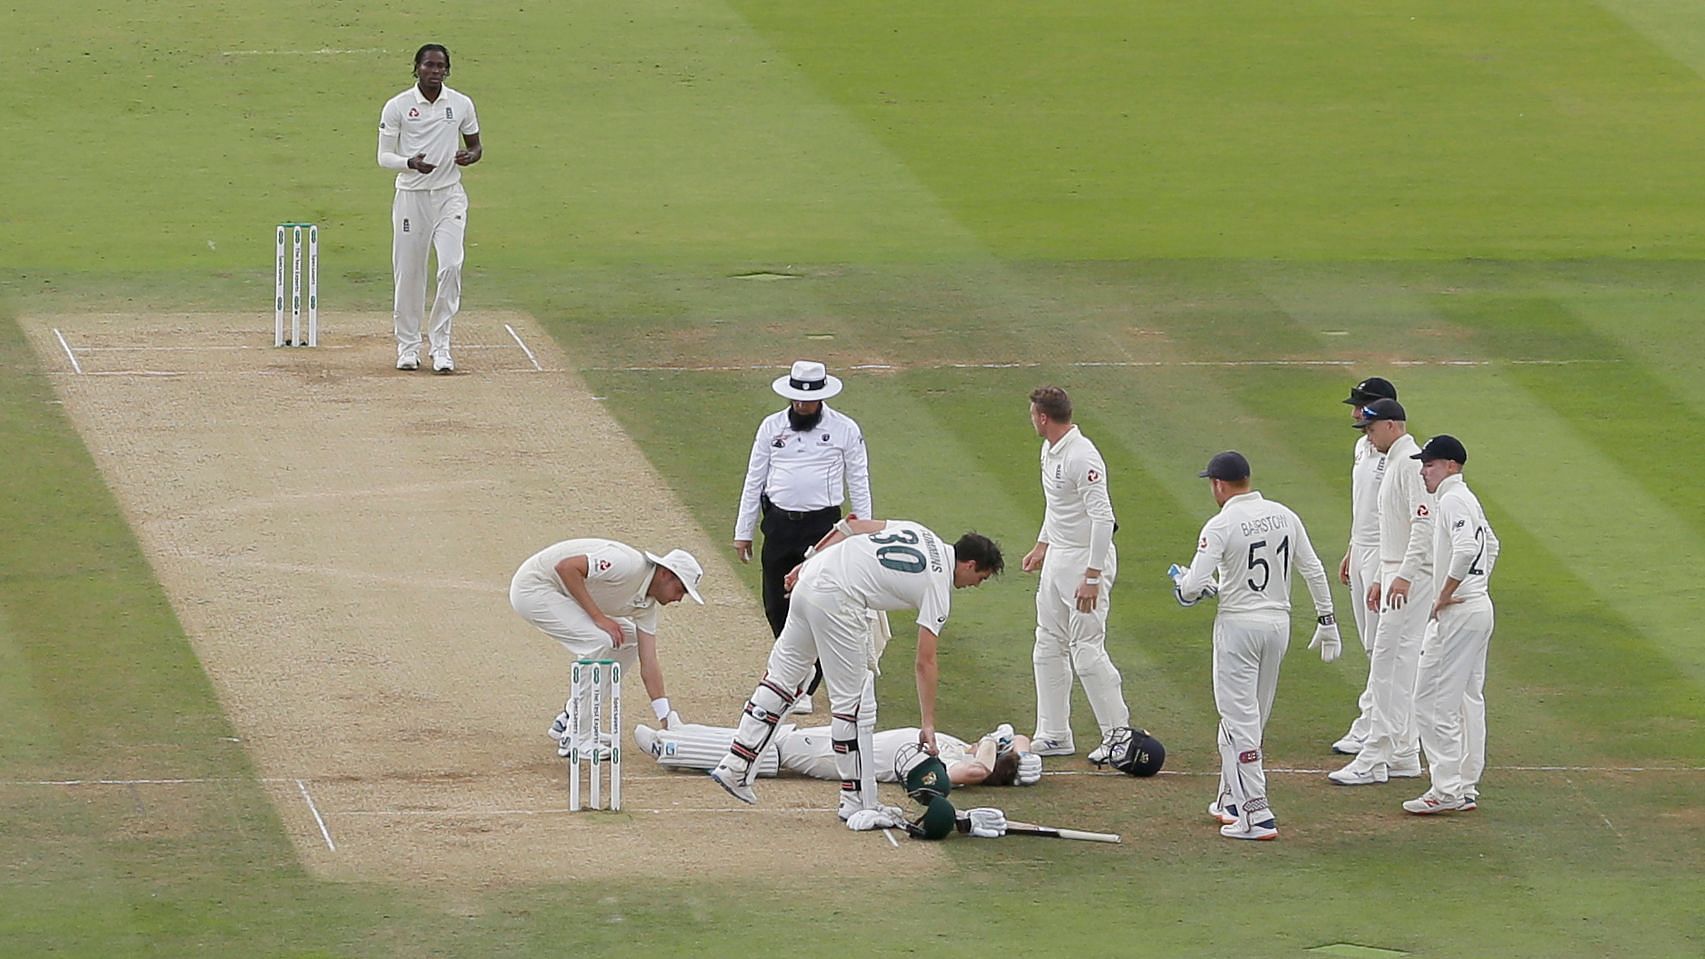 Steve Smith collapsed to the ground face first after the vicious ball from Jofra Archer smacked into the side of his neck.